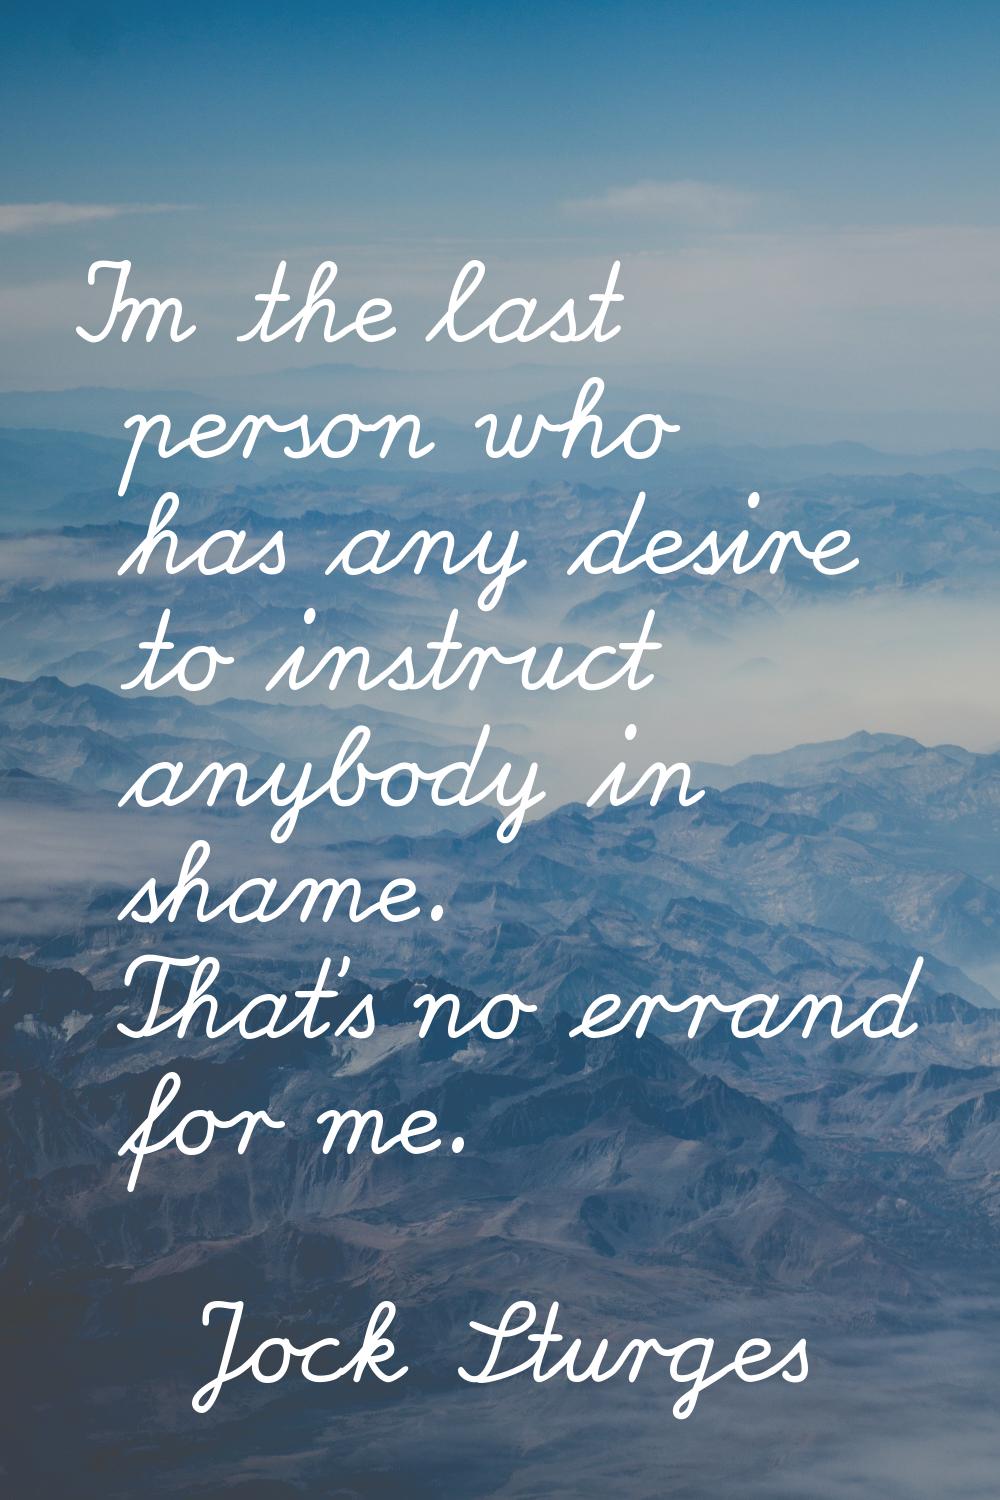 I'm the last person who has any desire to instruct anybody in shame. That's no errand for me.